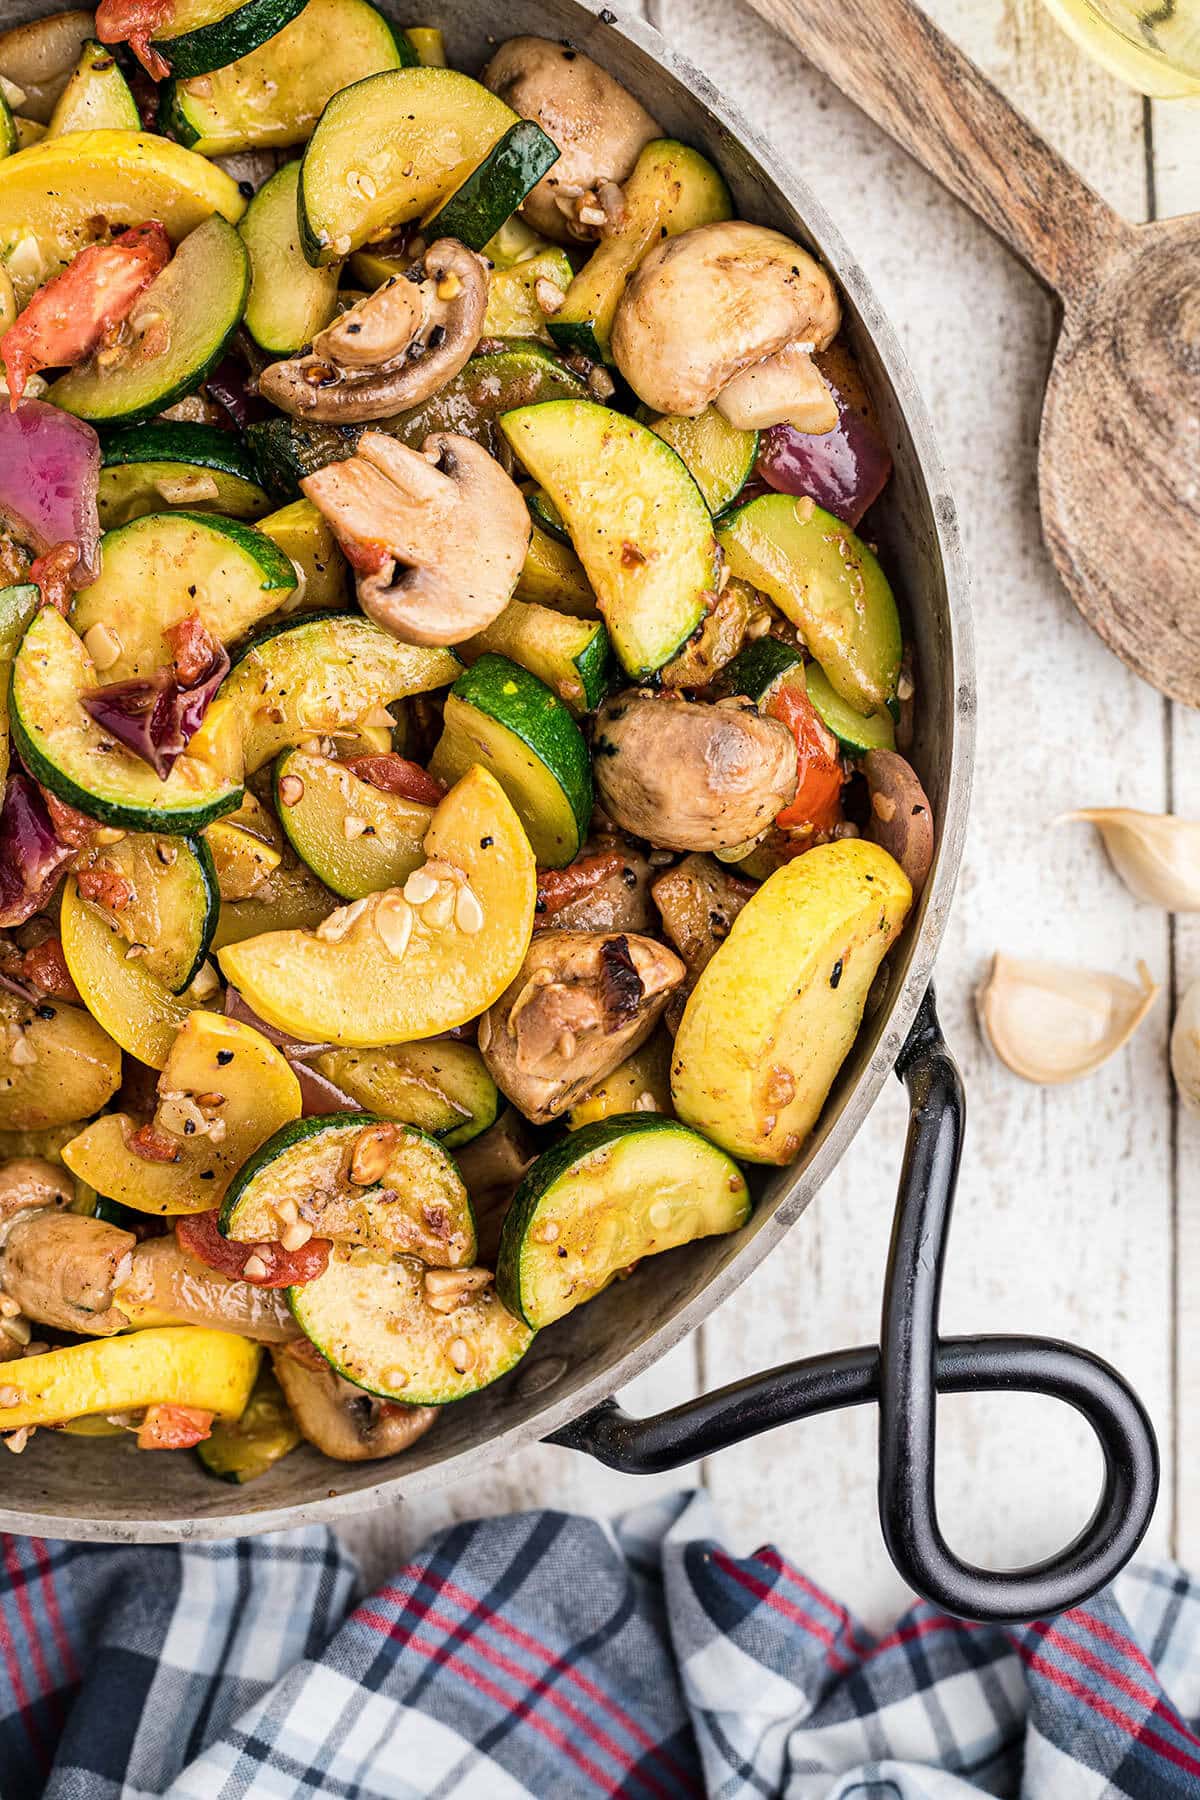 Roasted vegetables in fry pan with serving spoon.